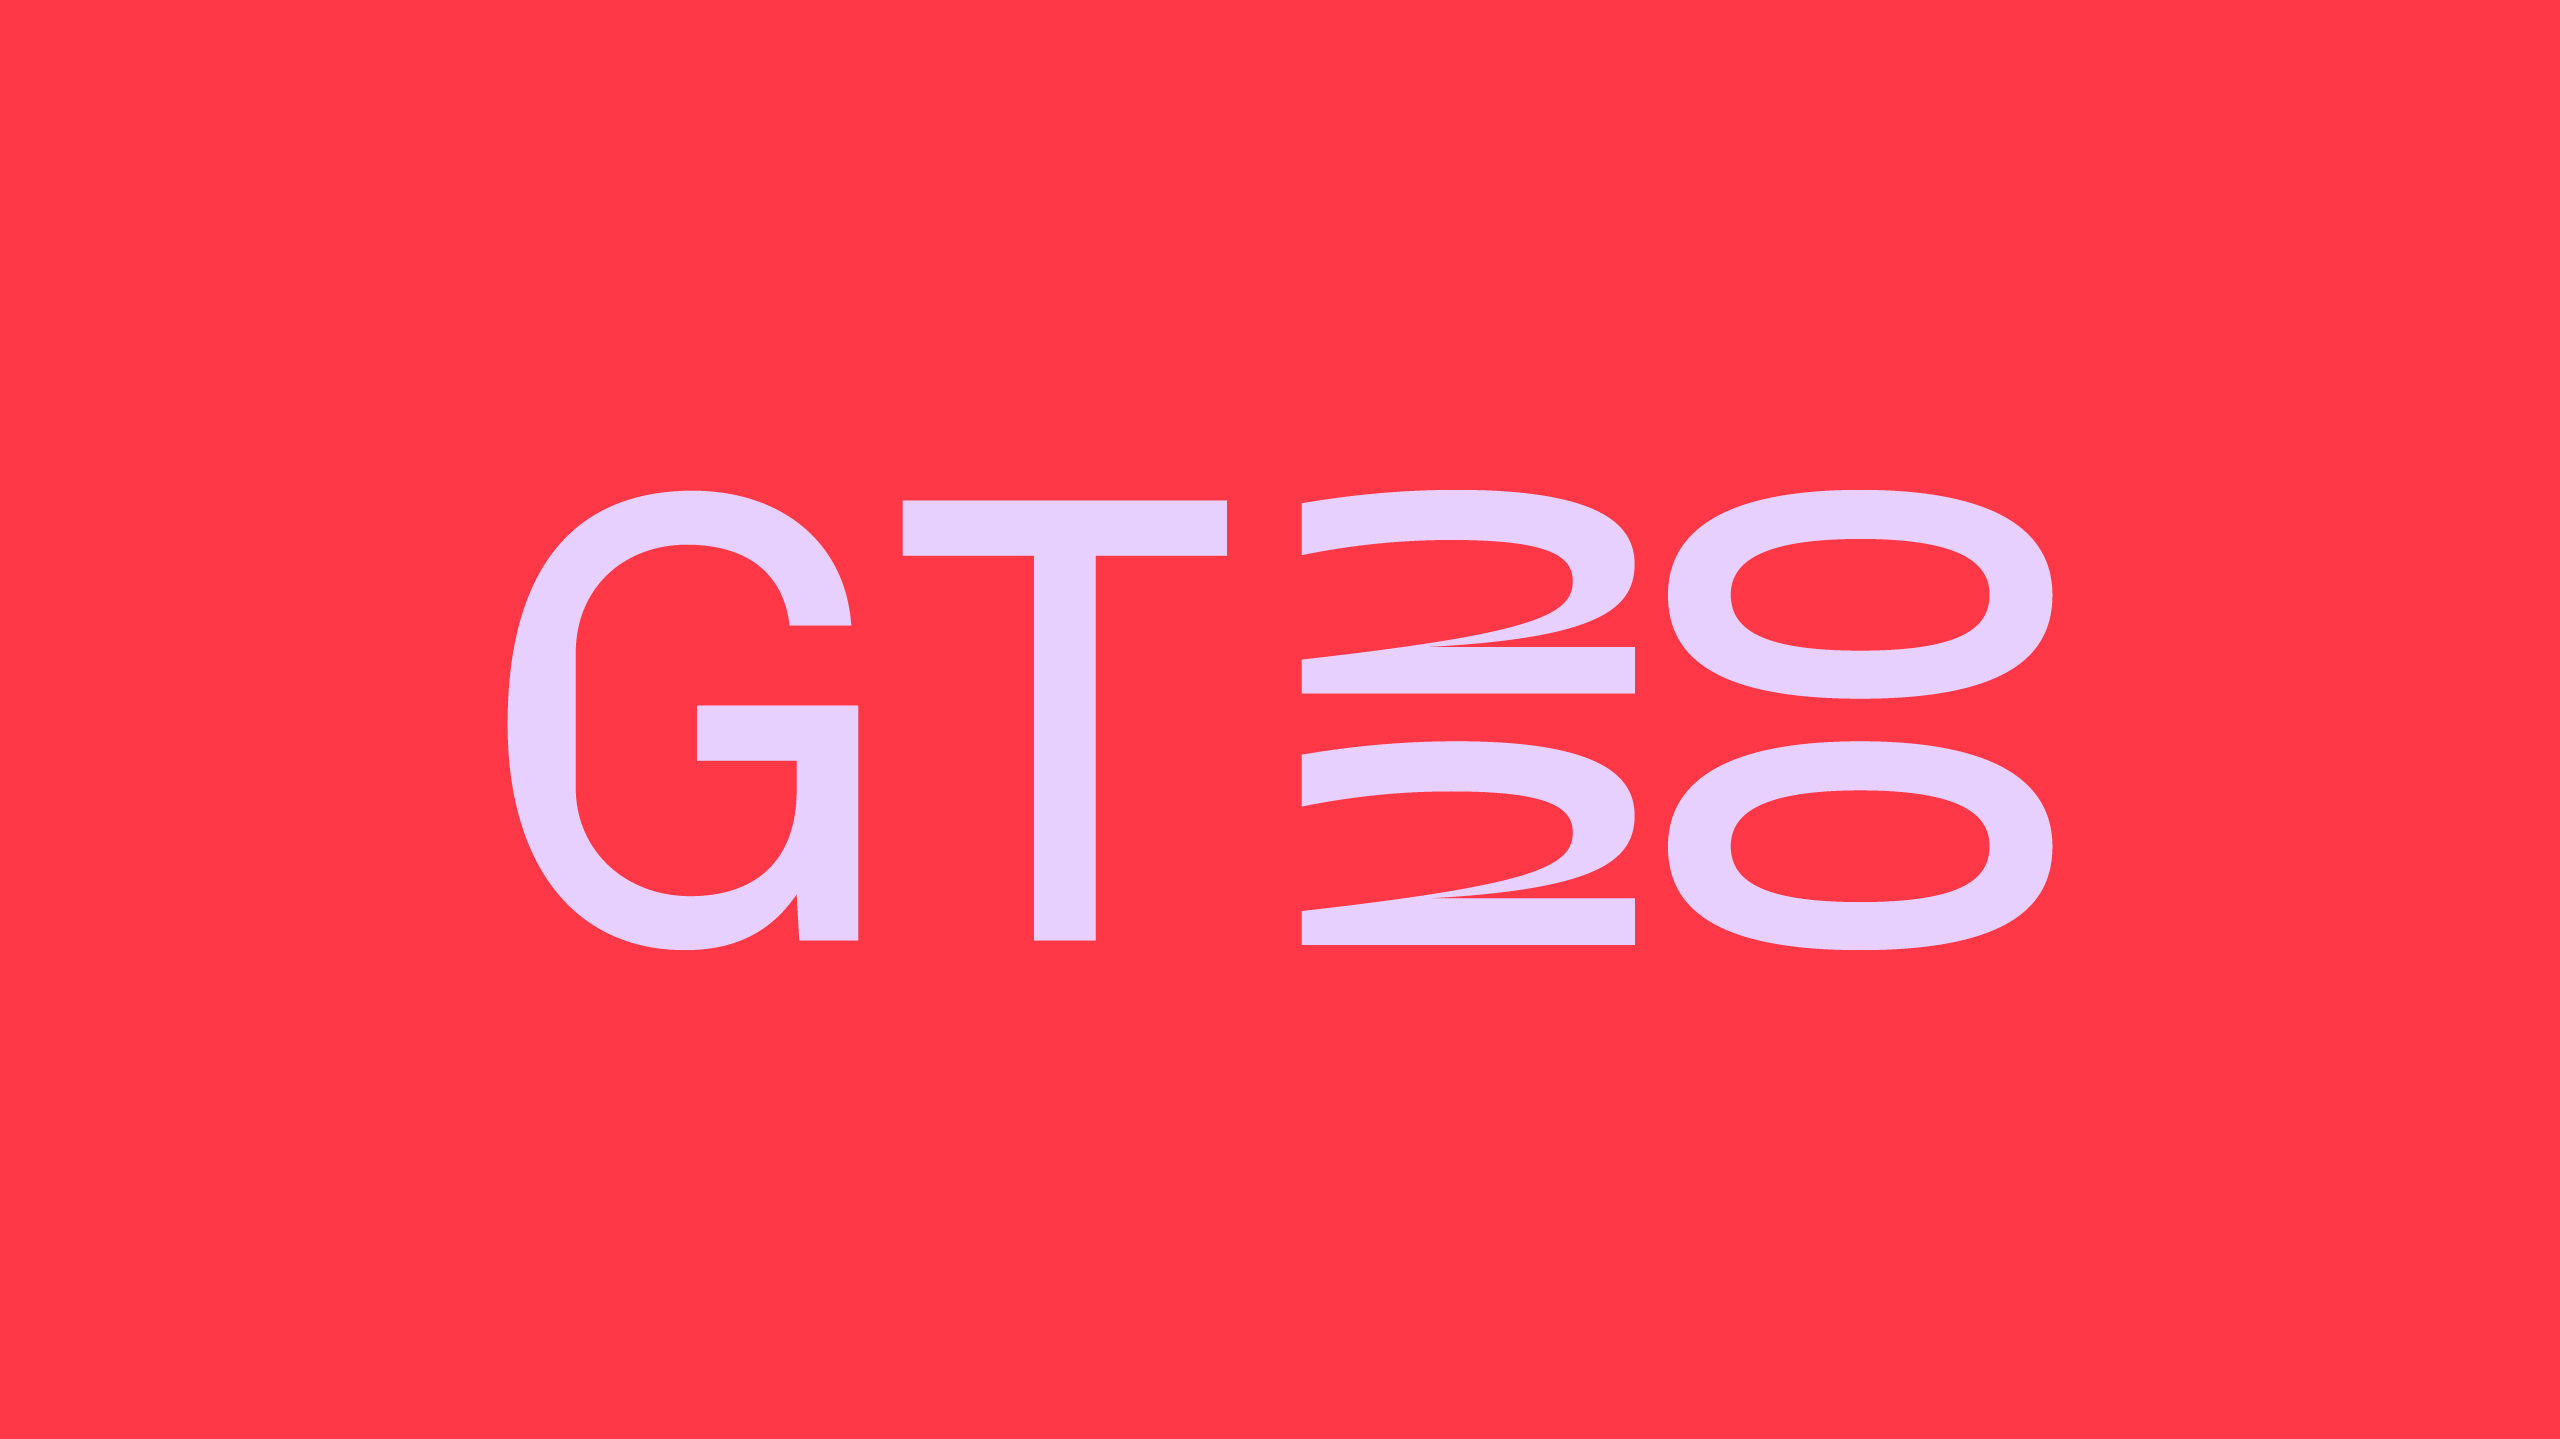 Grad Thesis 2020 logo on red